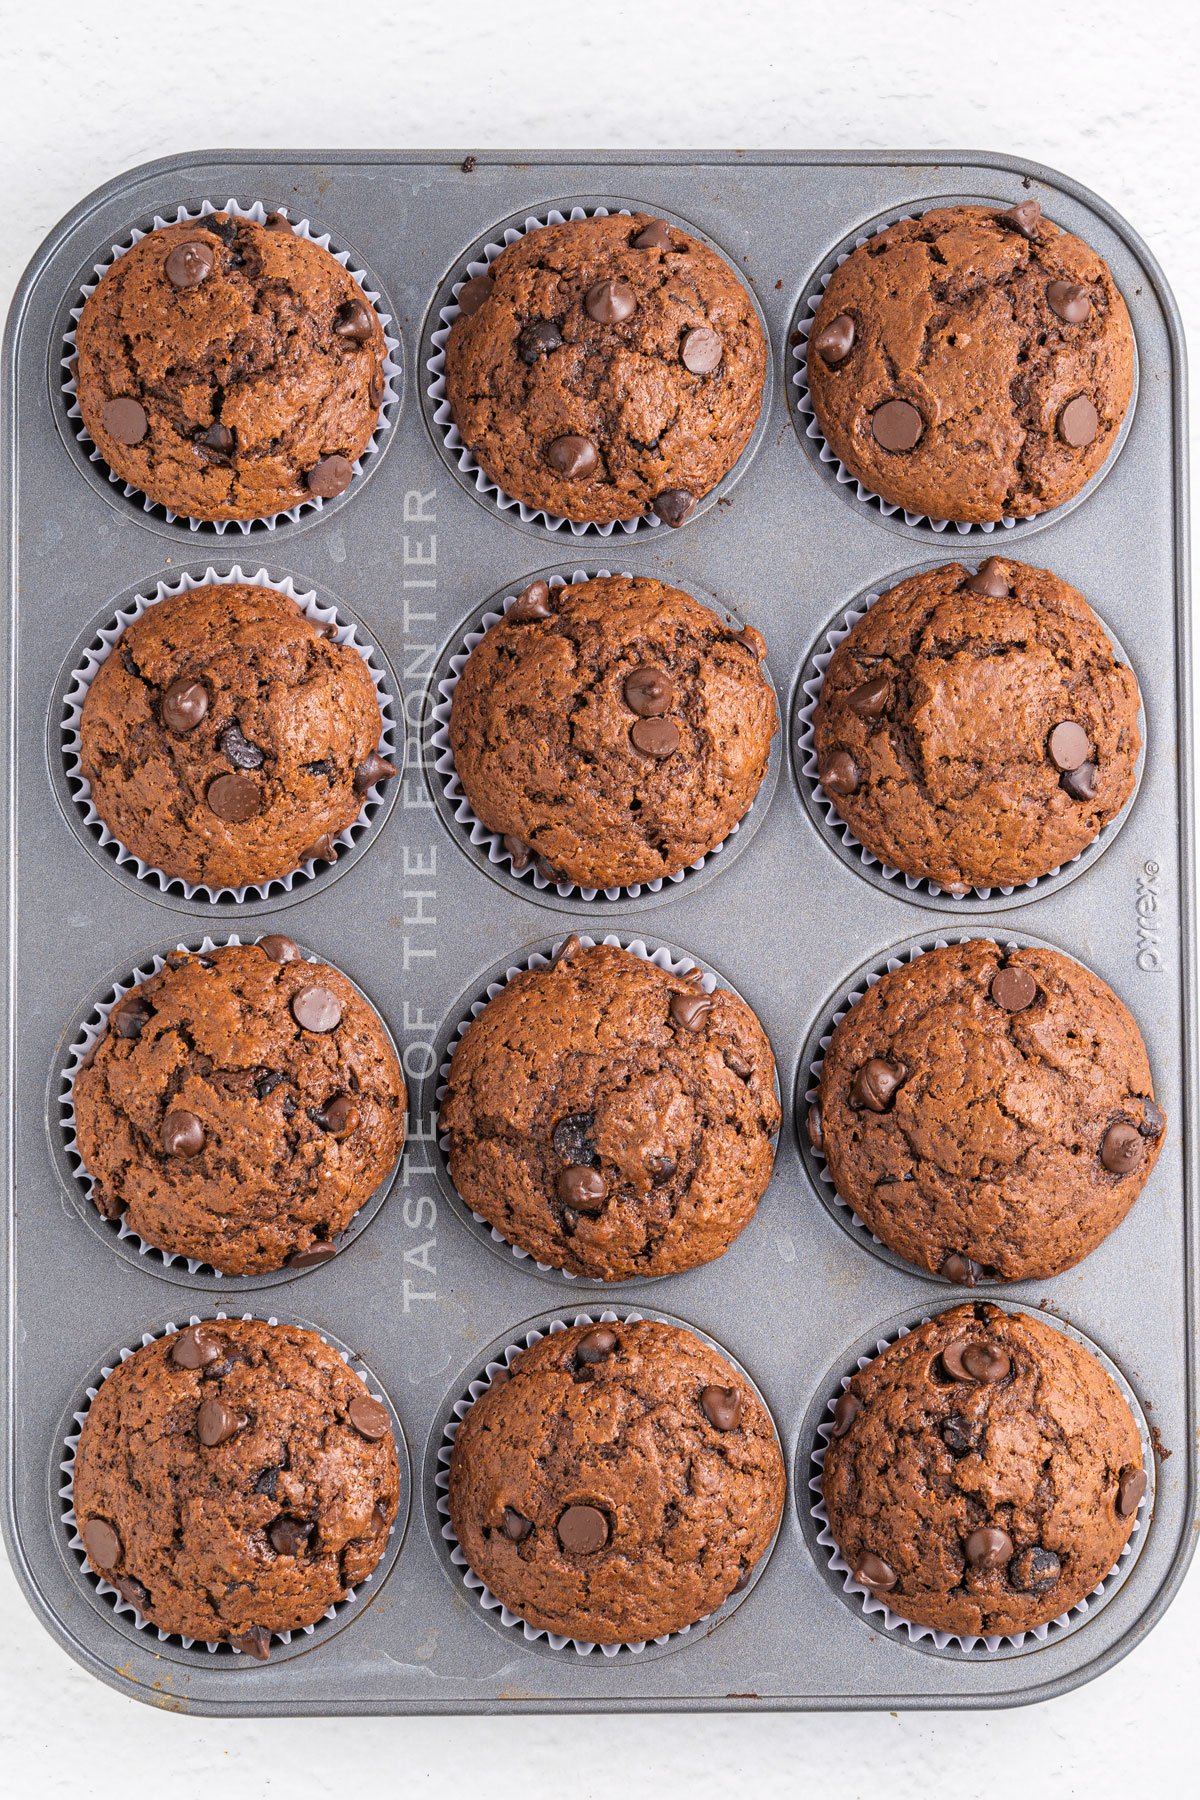 baked muffins with chocolate